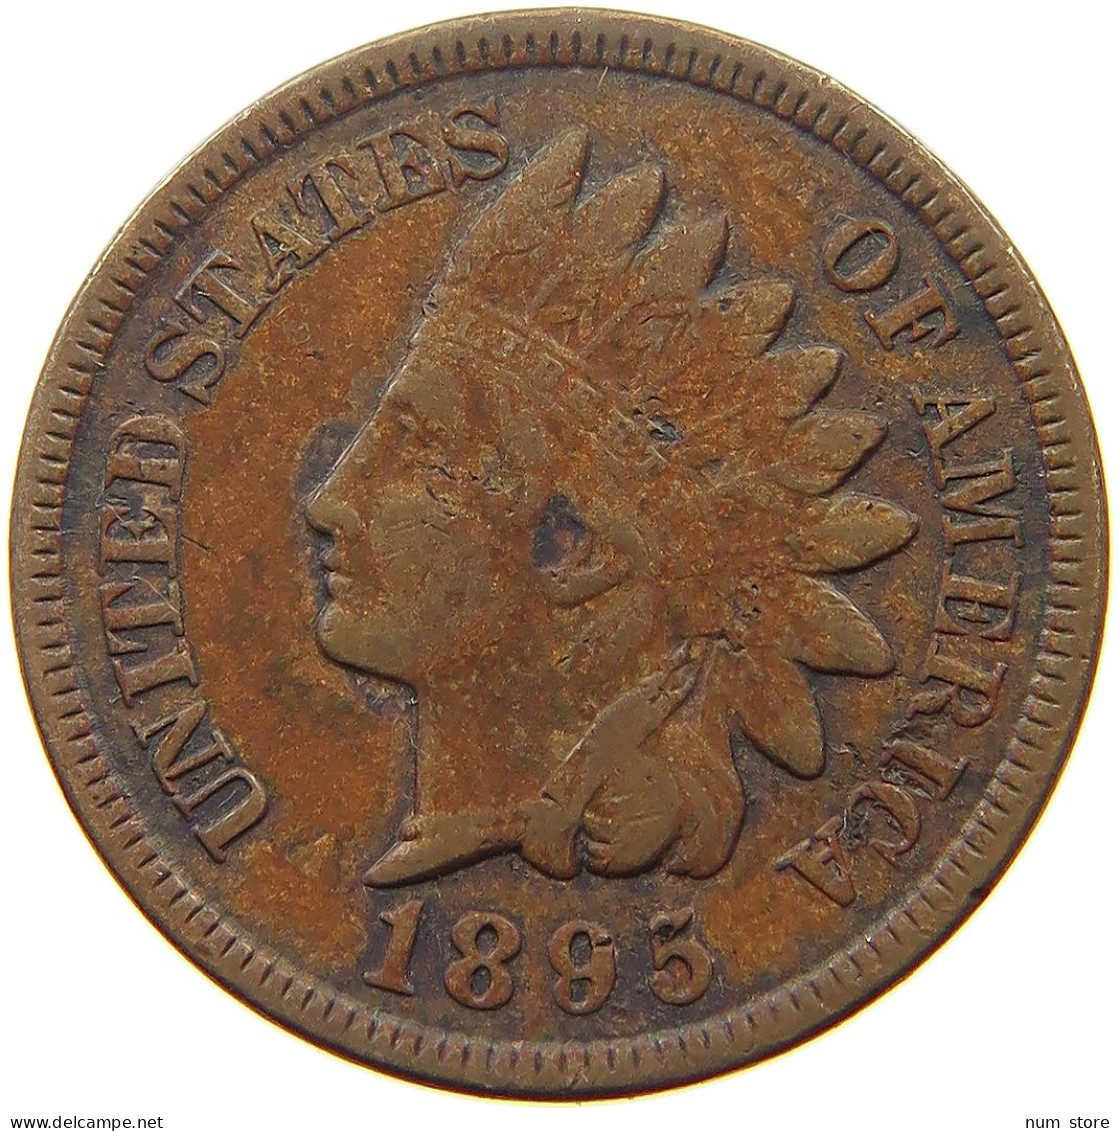 UNITED STATES OF AMERICA CENT 1895 INDIAN HEAD #s051 0865 - 1859-1909: Indian Head